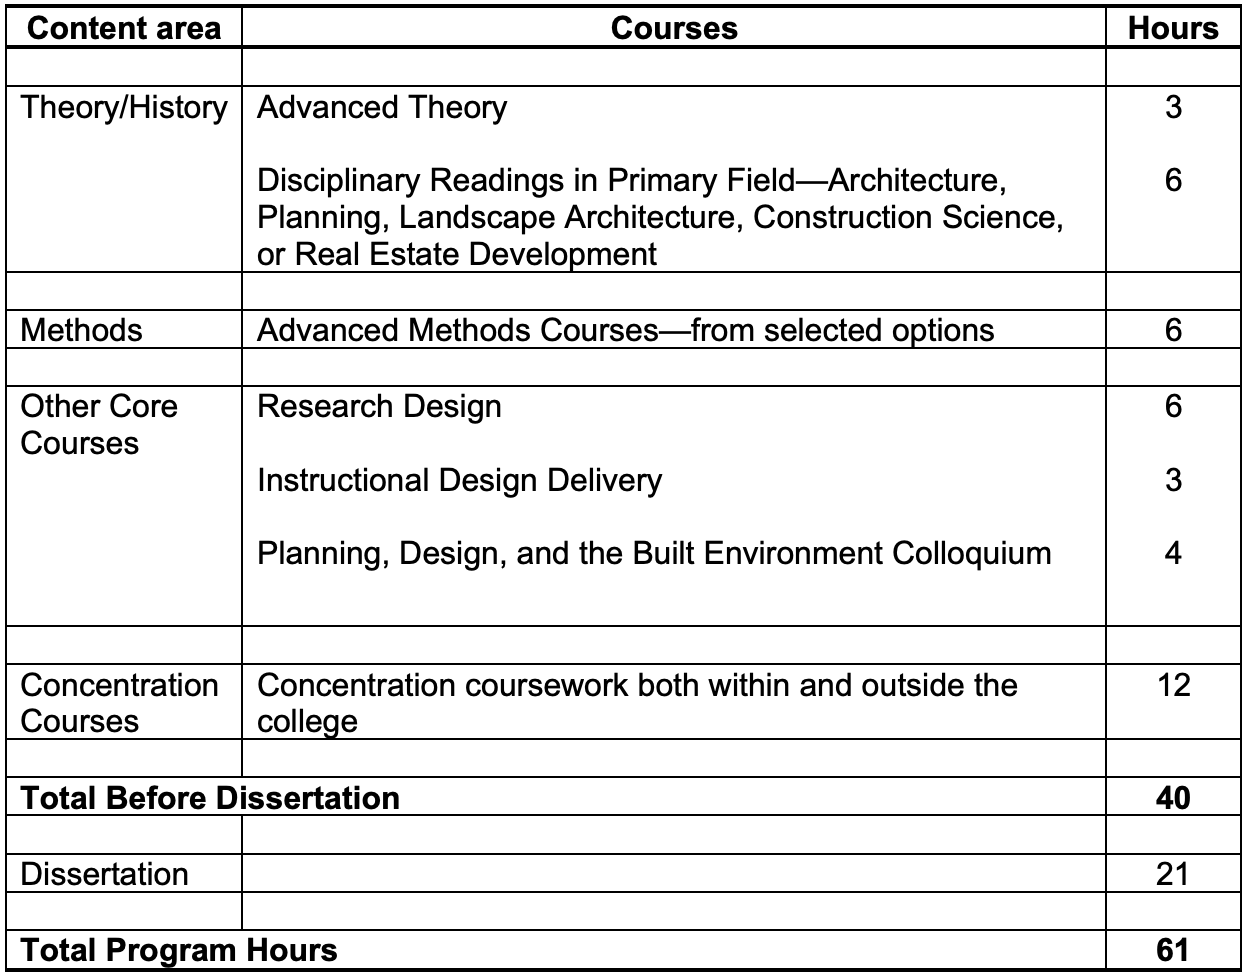 pdbe core curriculum image